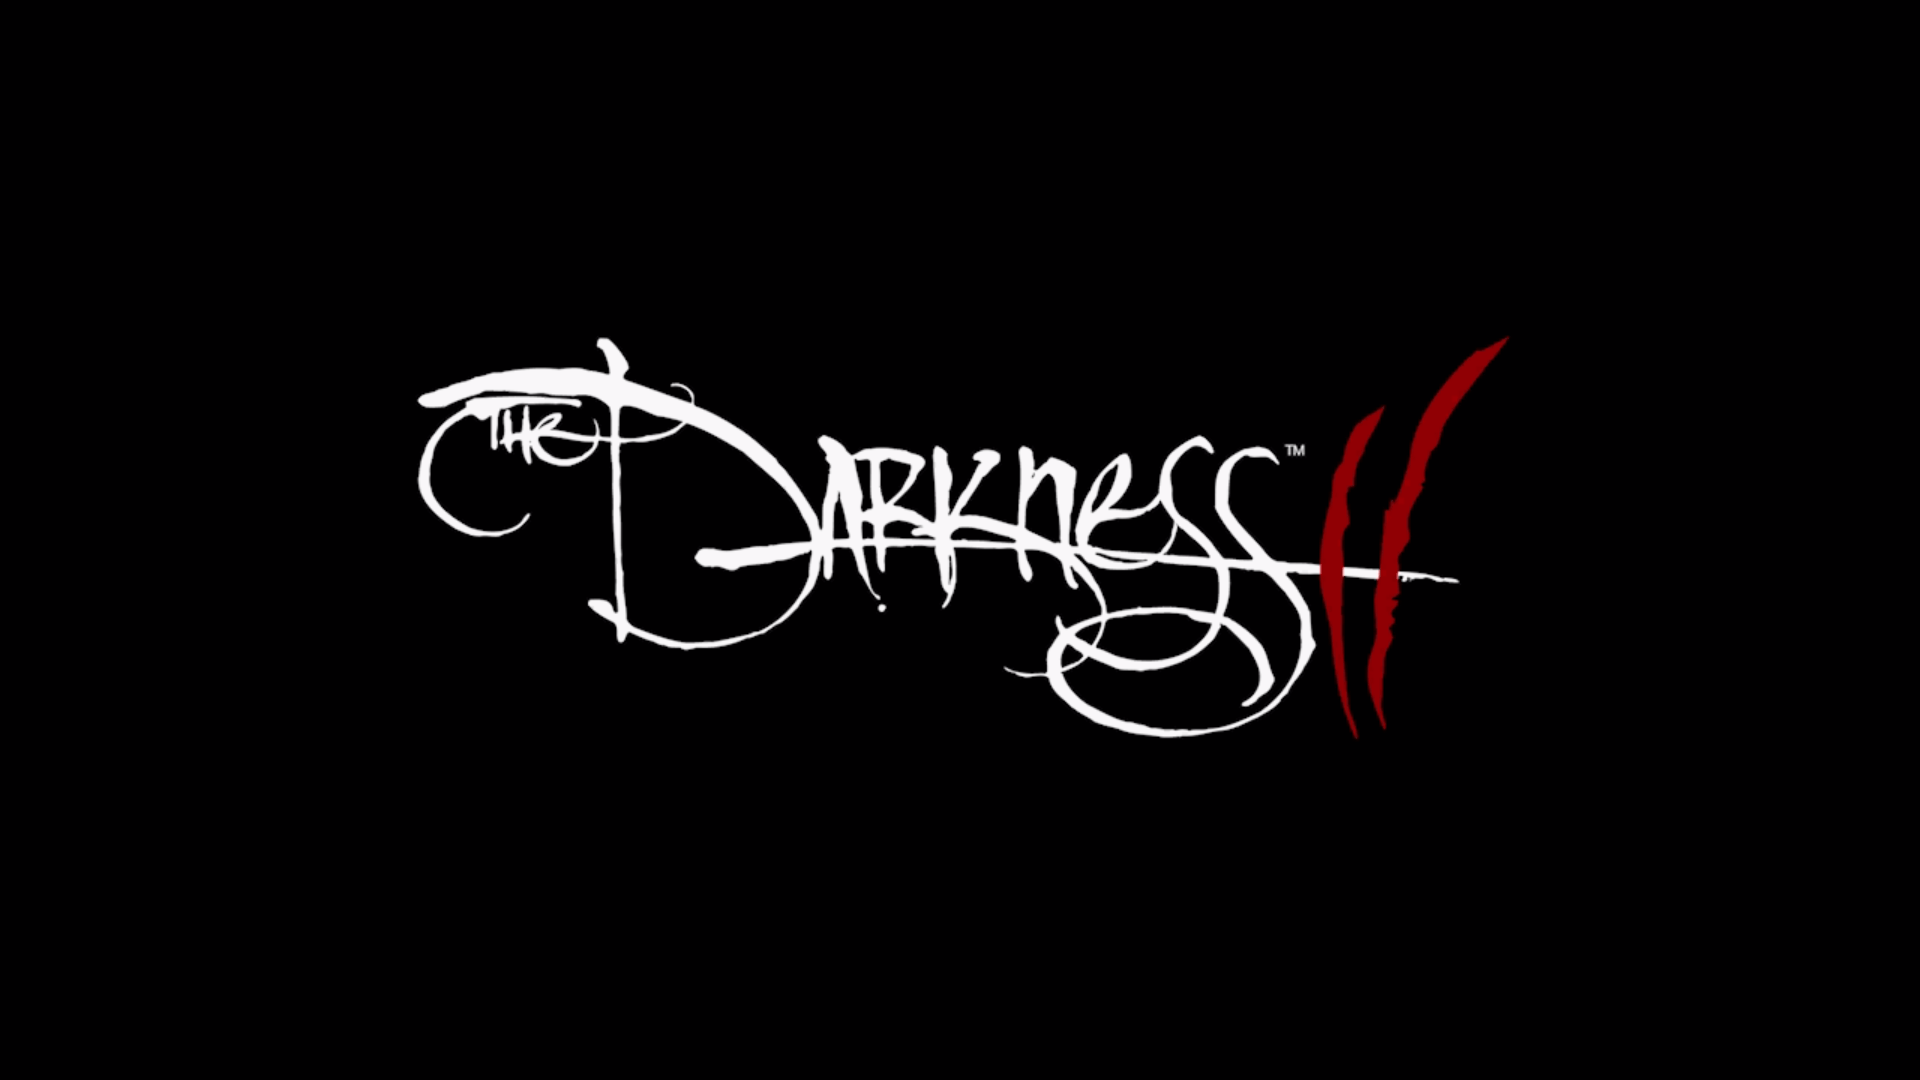 The Darkness Logo Black Yuiphone